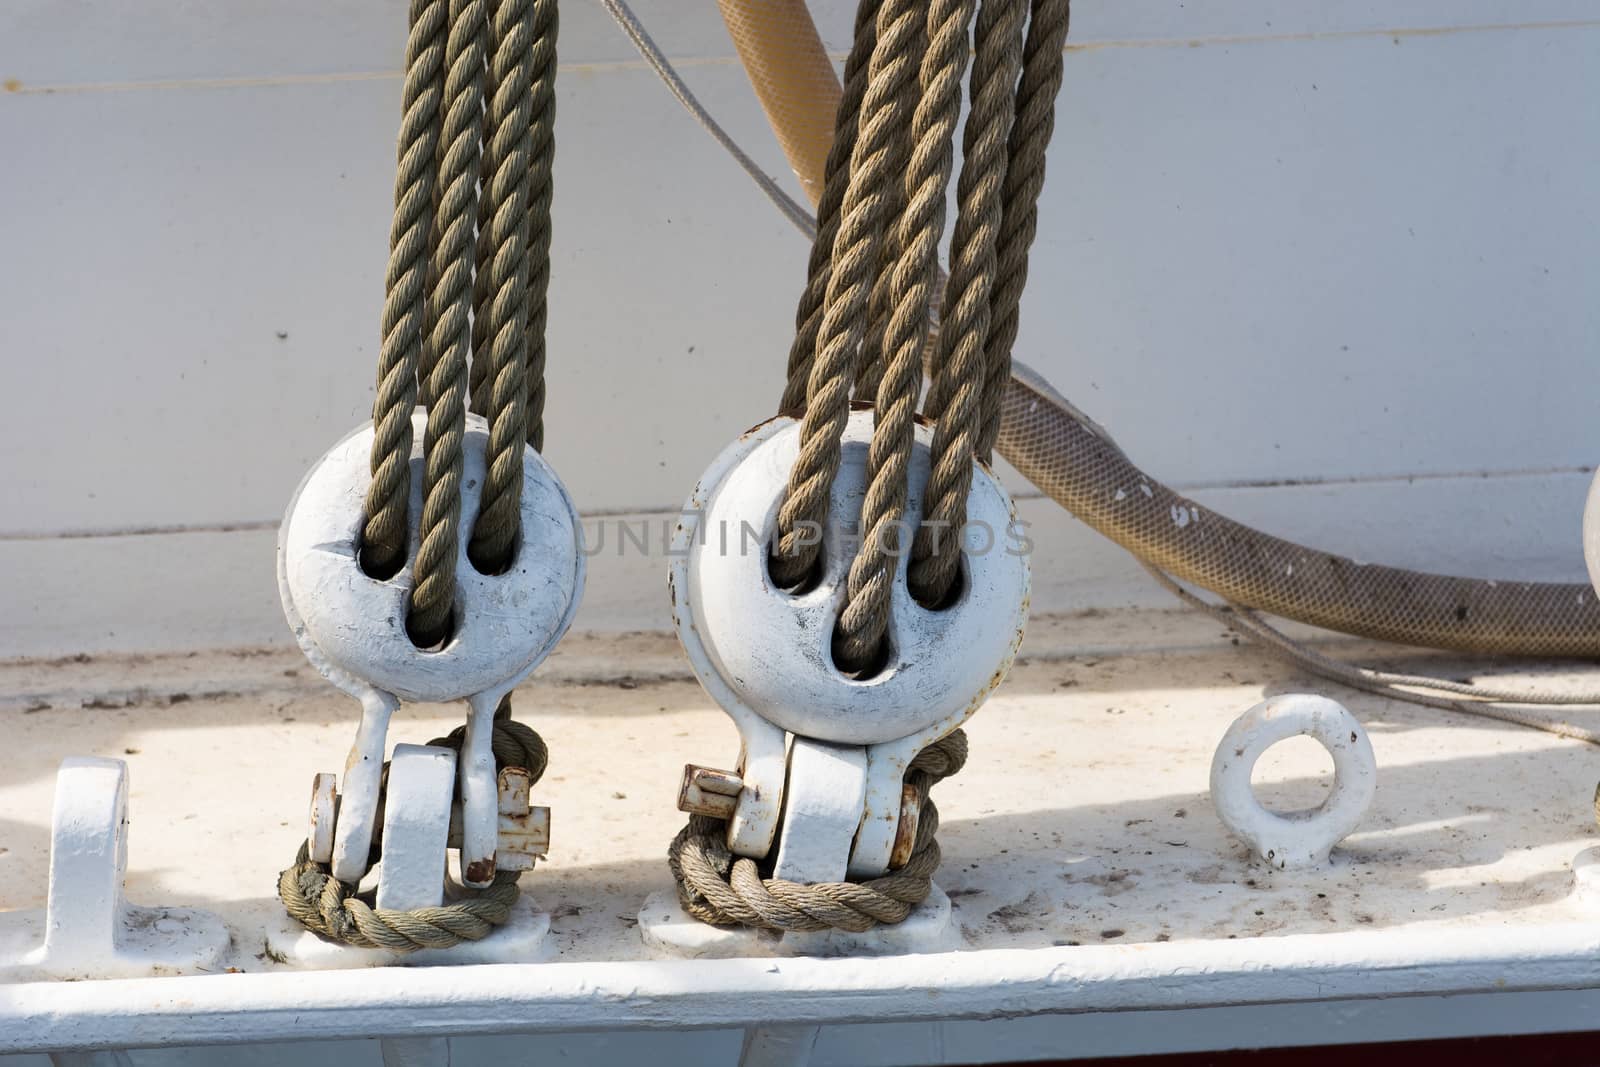 Detail of wooden block tackle marine rigs and ropes